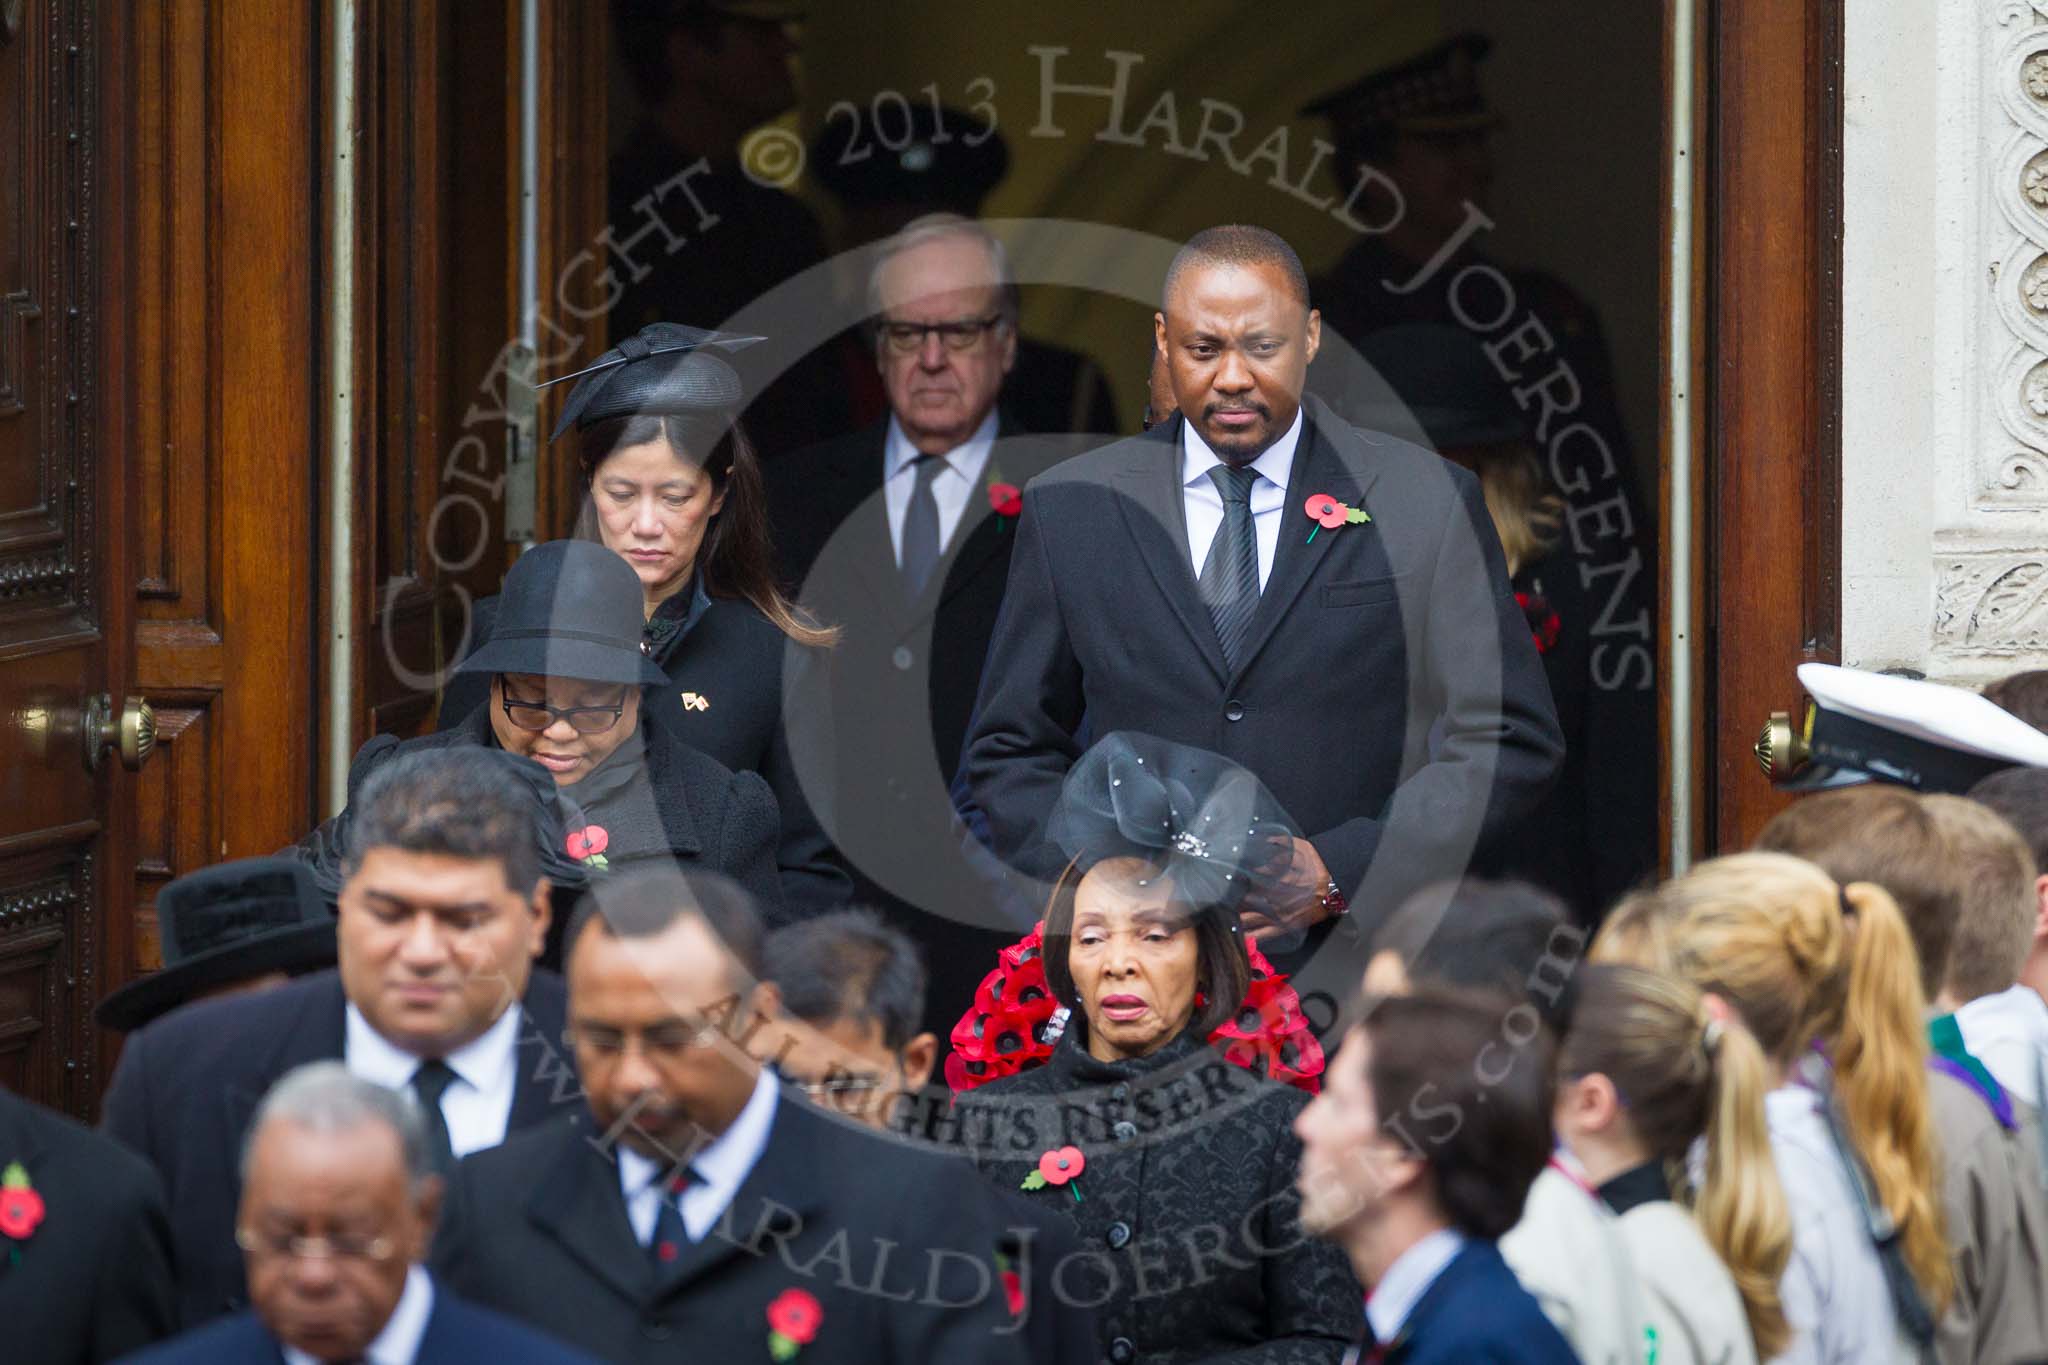 Remembrance Sunday at the Cenotaph 2015: The High Commissioners or their representatives leaving the Foreign- and Commonwealth Office. Image #98, 08 November 2015 10:55 Whitehall, London, UK